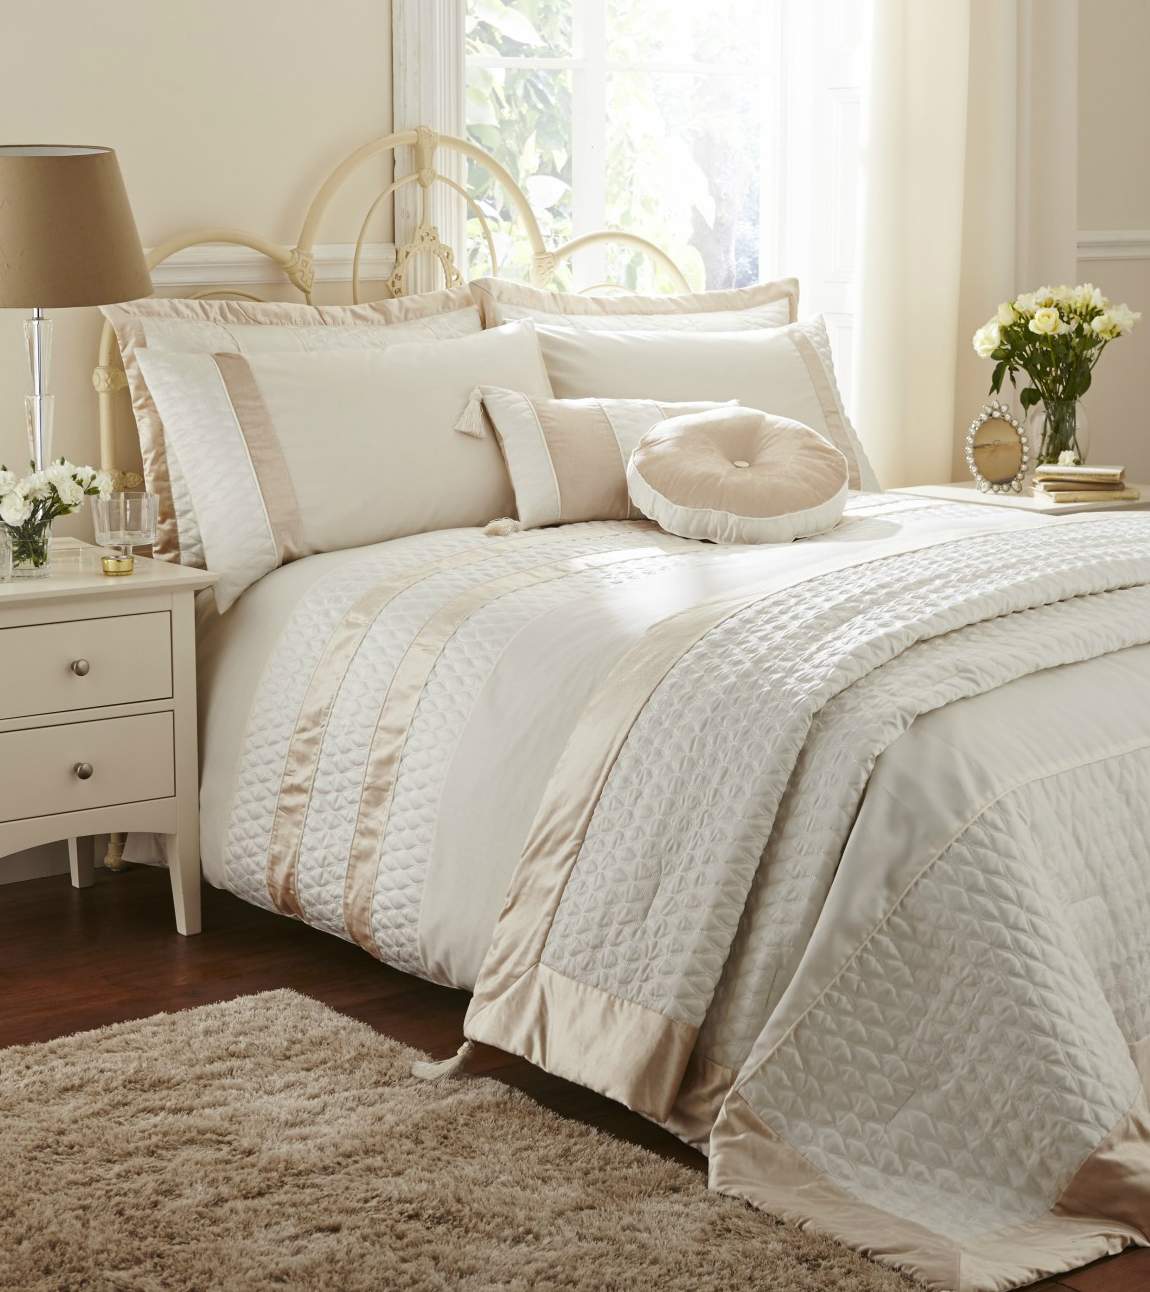 Coloroll Aston Cream Quilted Panel Double Size Duvet Bedding Set